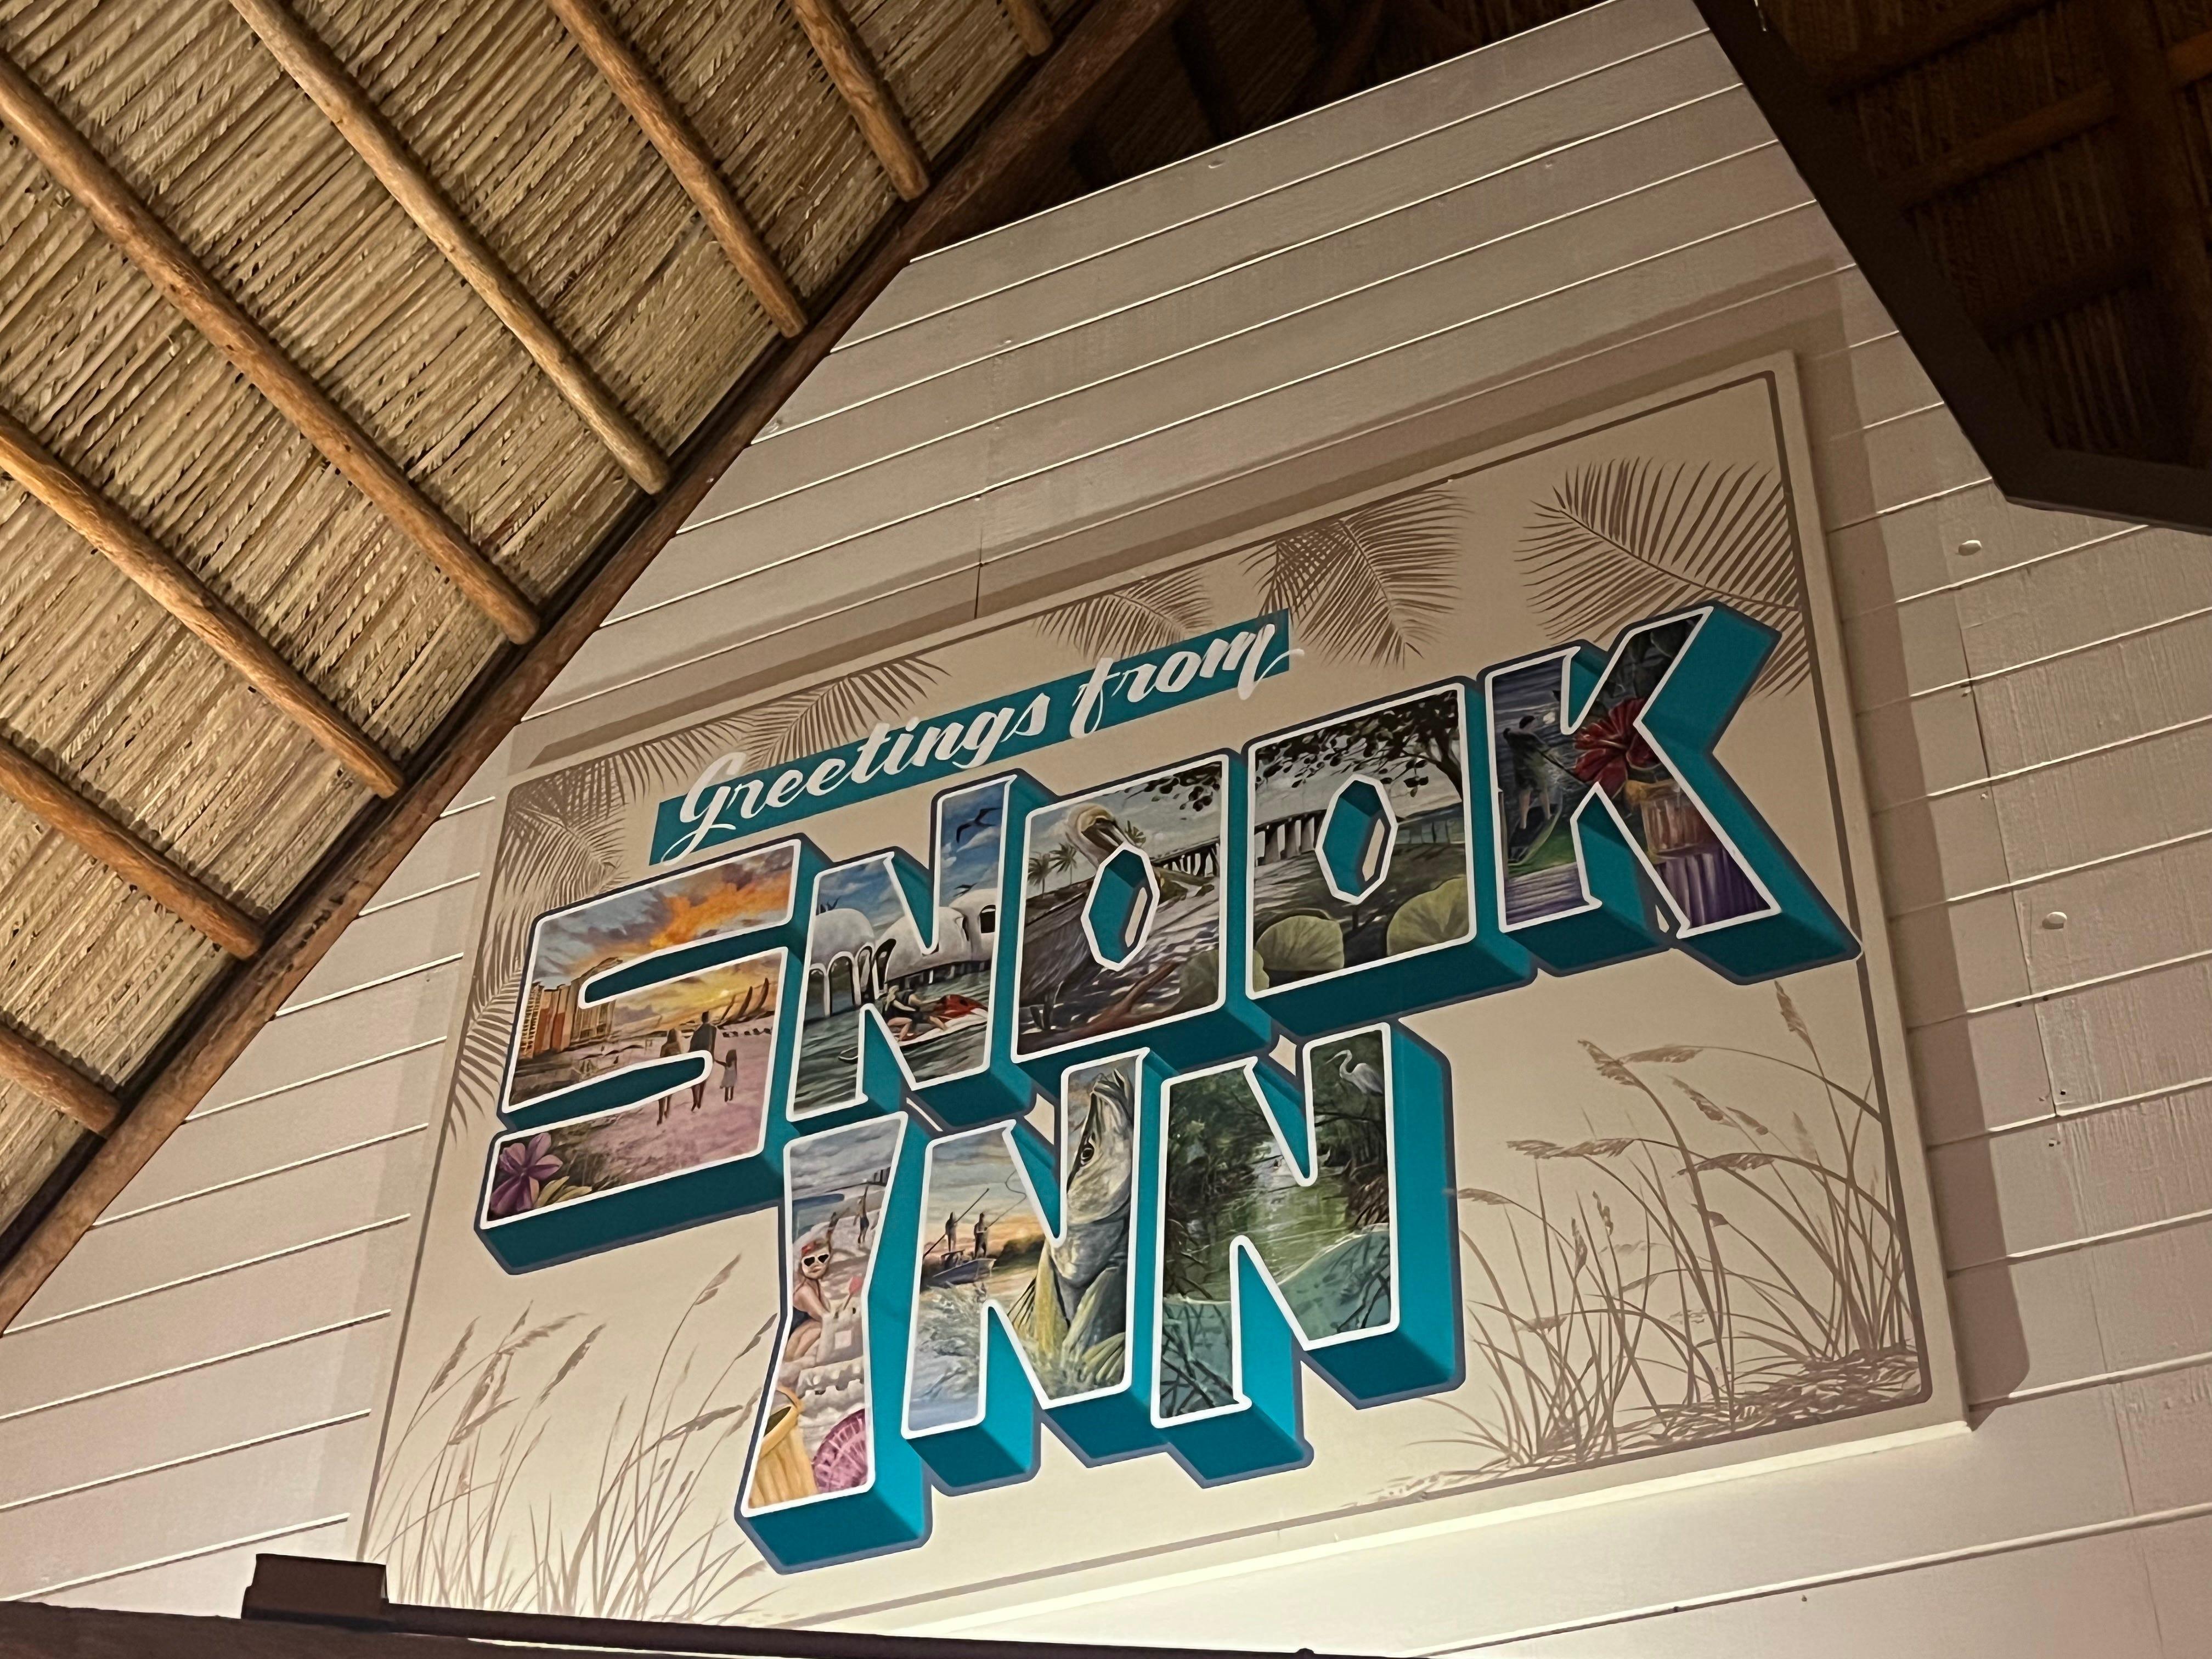 Snook Inn on Marco Island reopened today after a year. Luigi Carvelli, president of Carvelli Restaurant Group which owns Snook, hosted a private friends and family party Saturday night.